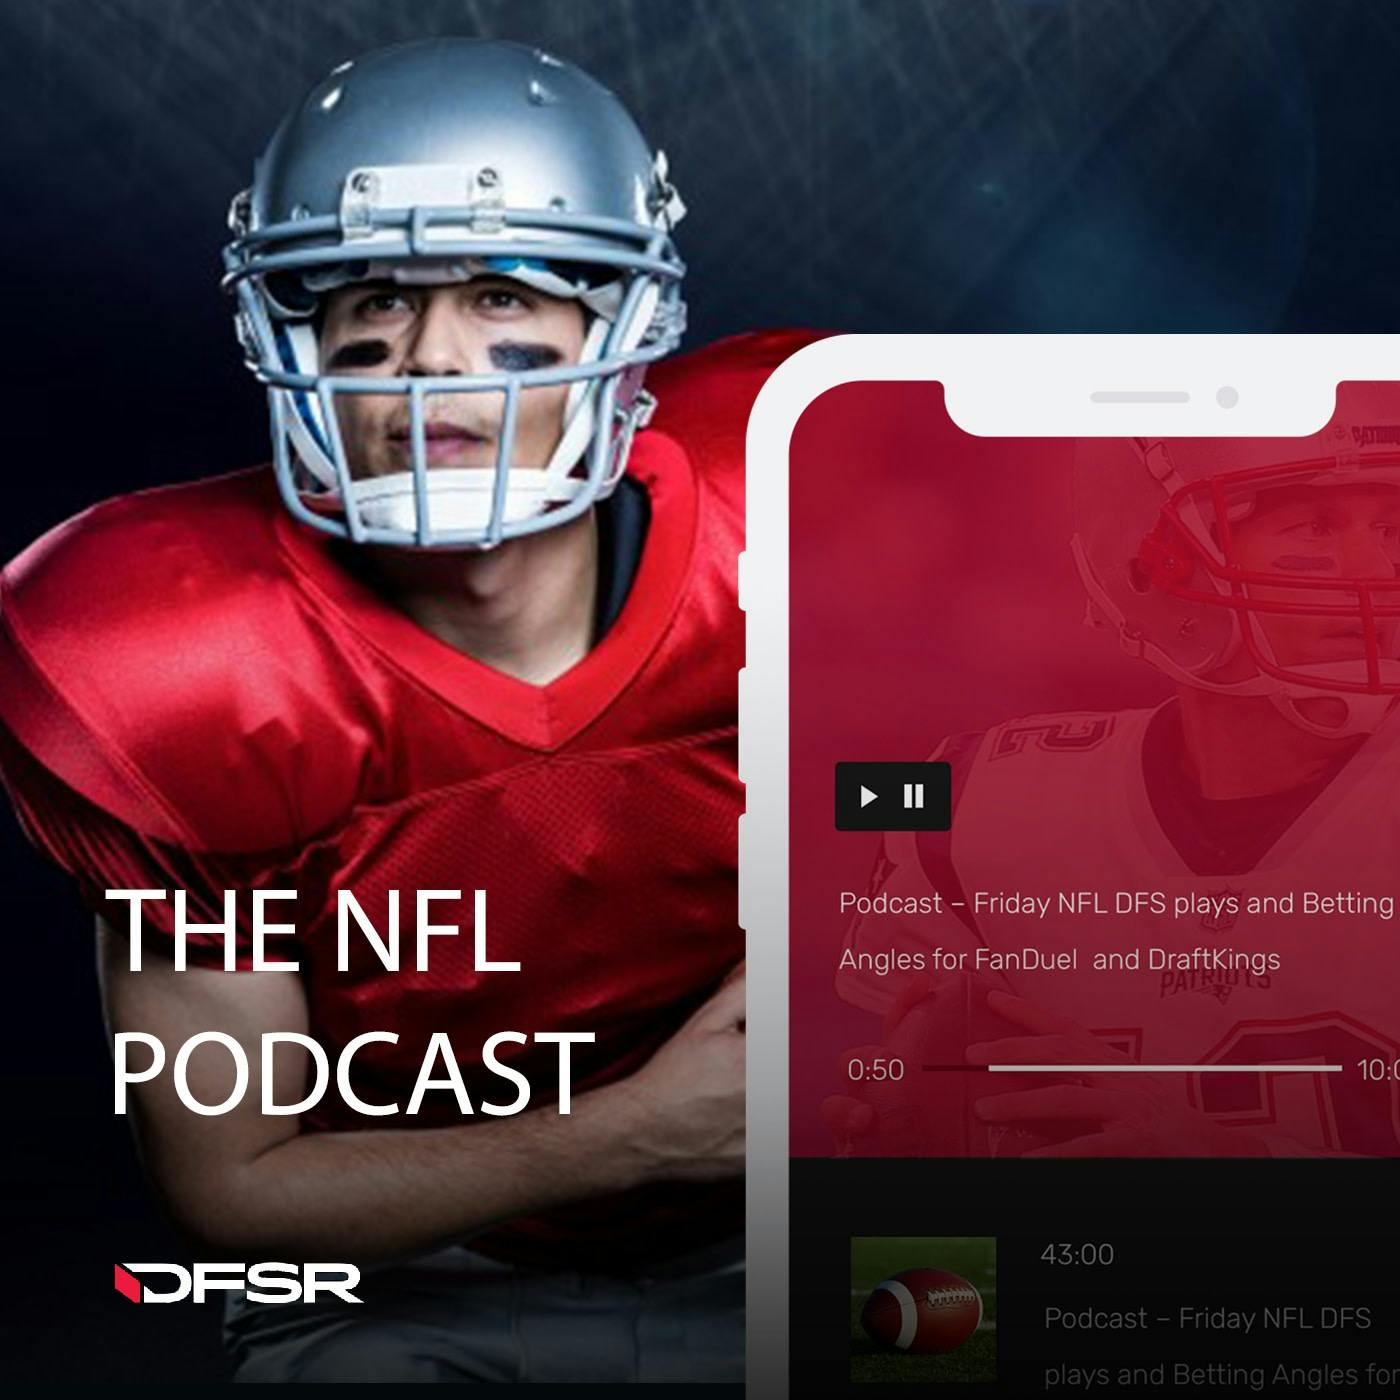 DFS NFL Podcast Week 4 Recap and Week 5 Preview for FanDuel and DraftKings